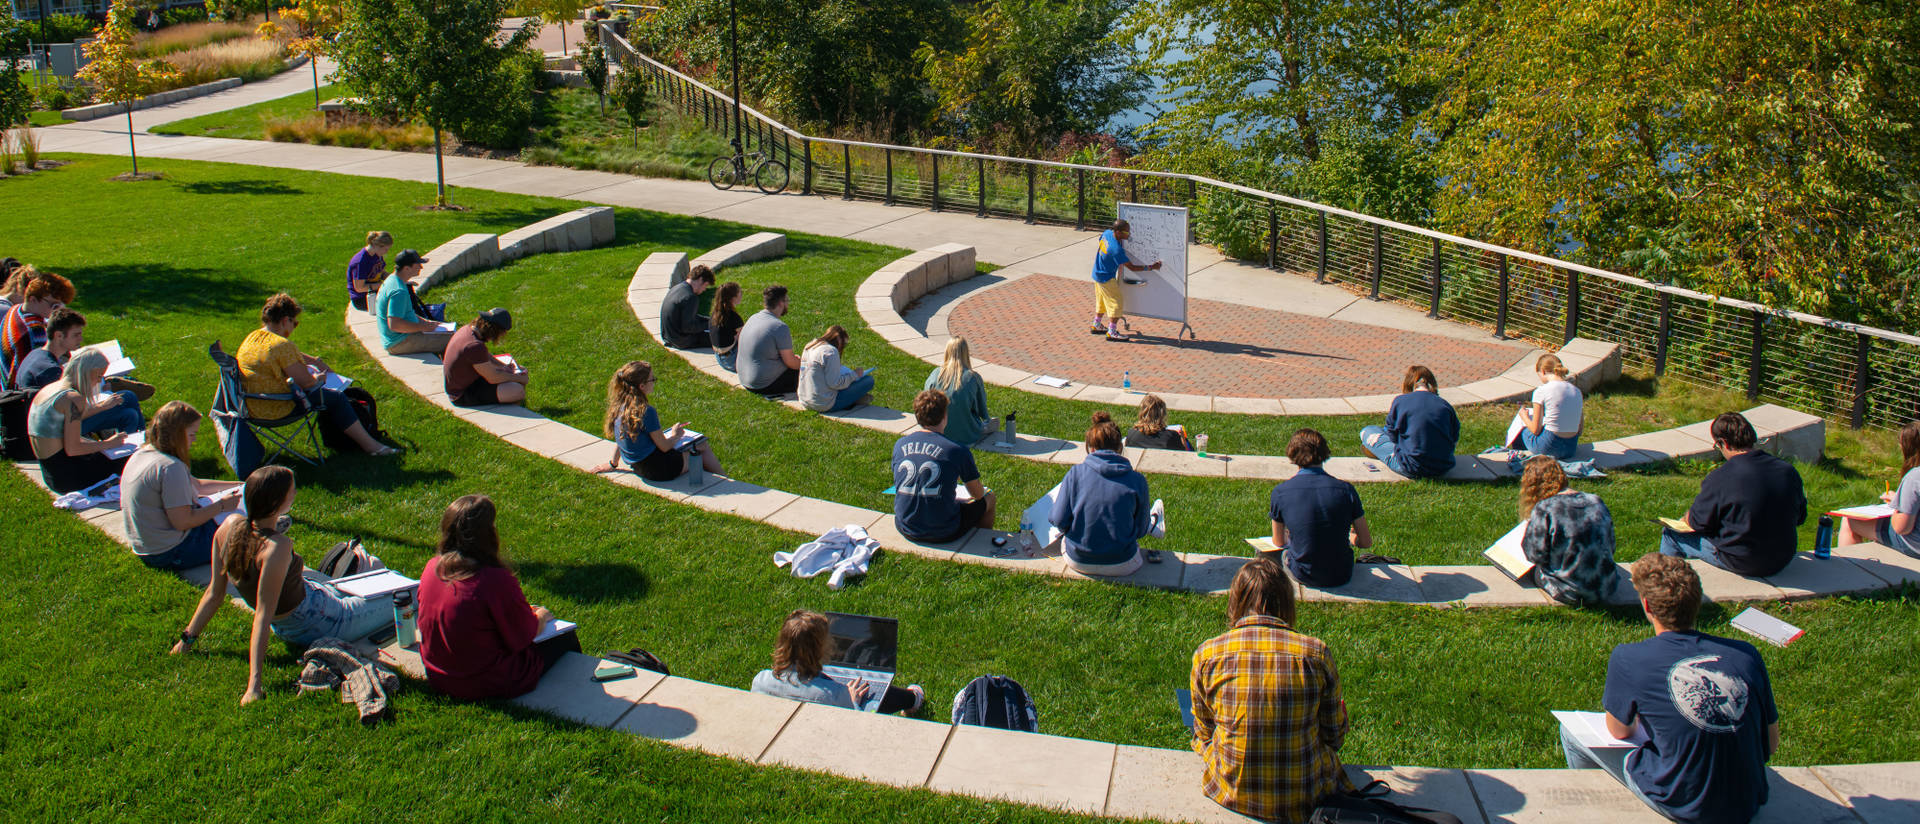 Students sit outside for class during a nice day on campus.